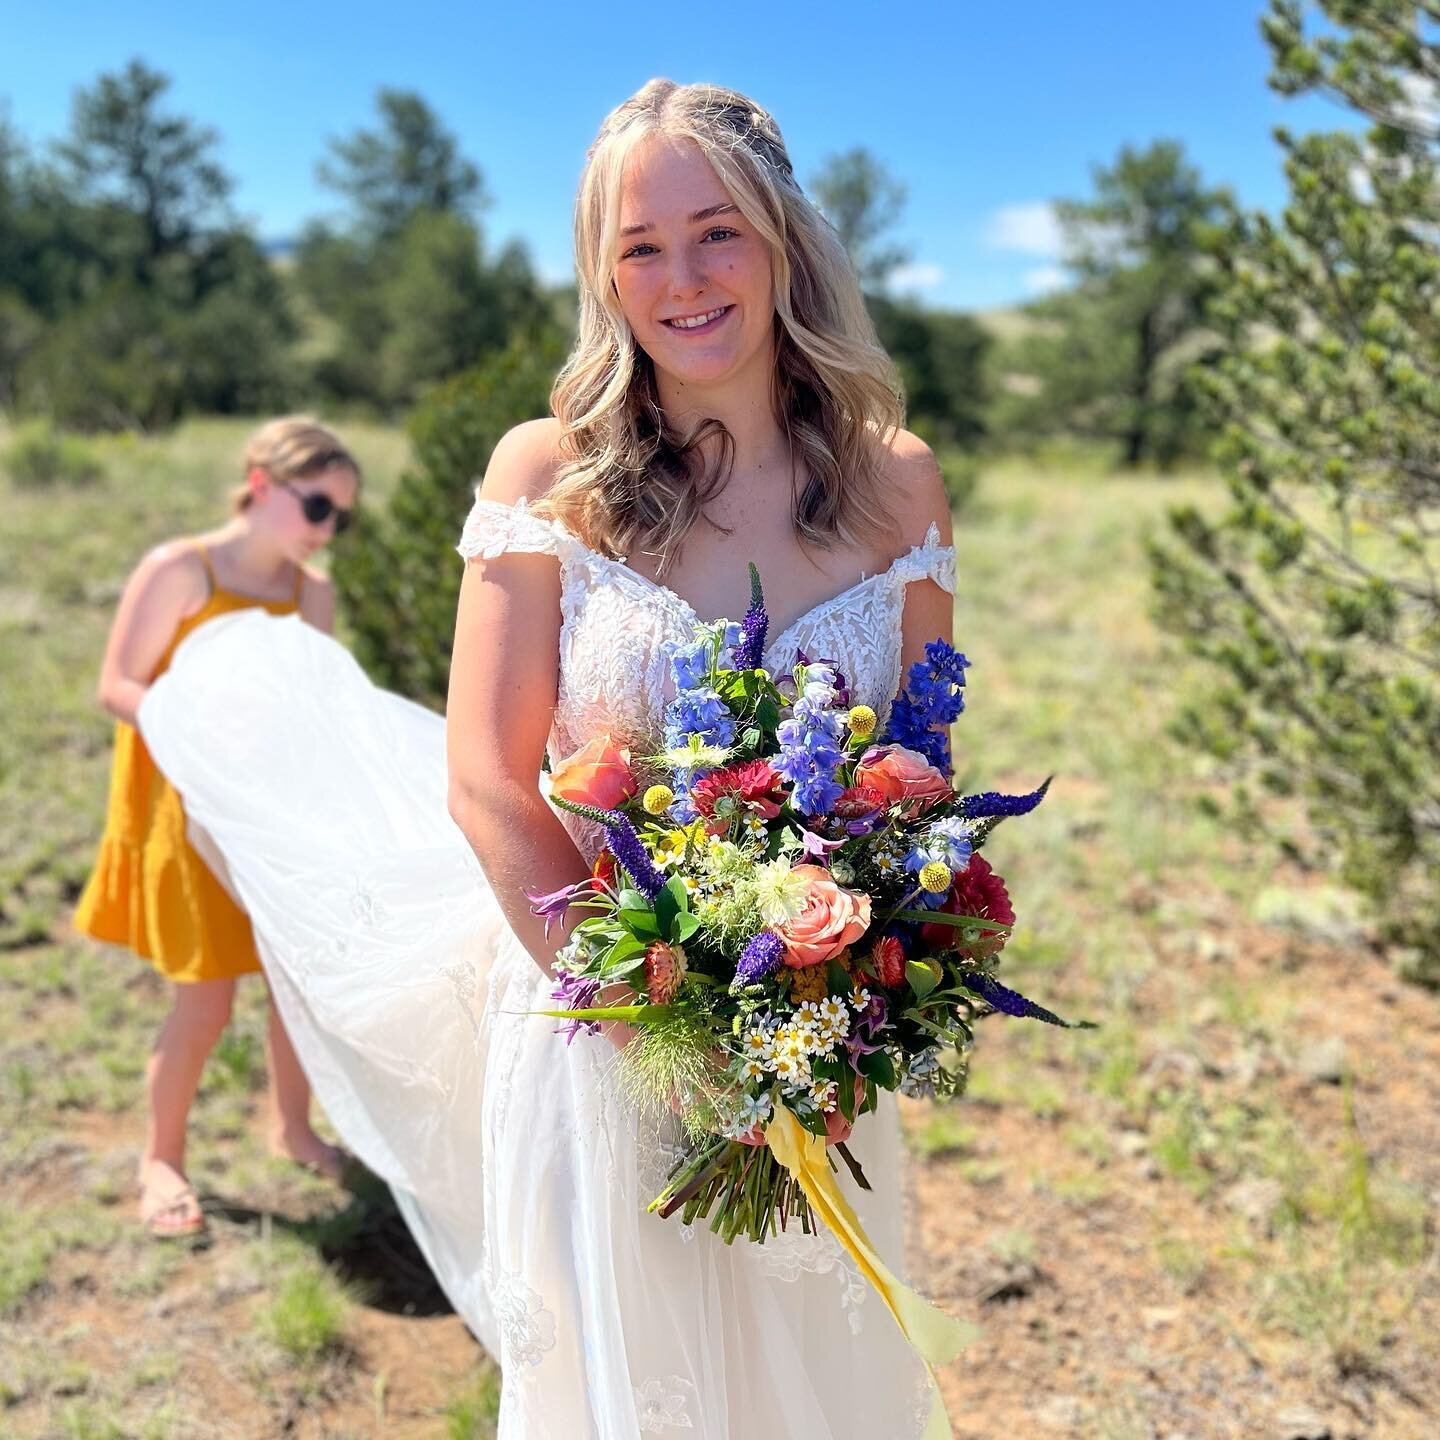 We had the joy of celebrating yet another family wedding today&hellip;our beautiful niece Sadie was married in a field of wildflowers high in the mountains of southern Colorado.
*
*
Swipe for a closeup of her wildflower inspired bouquet, &amp; watch 